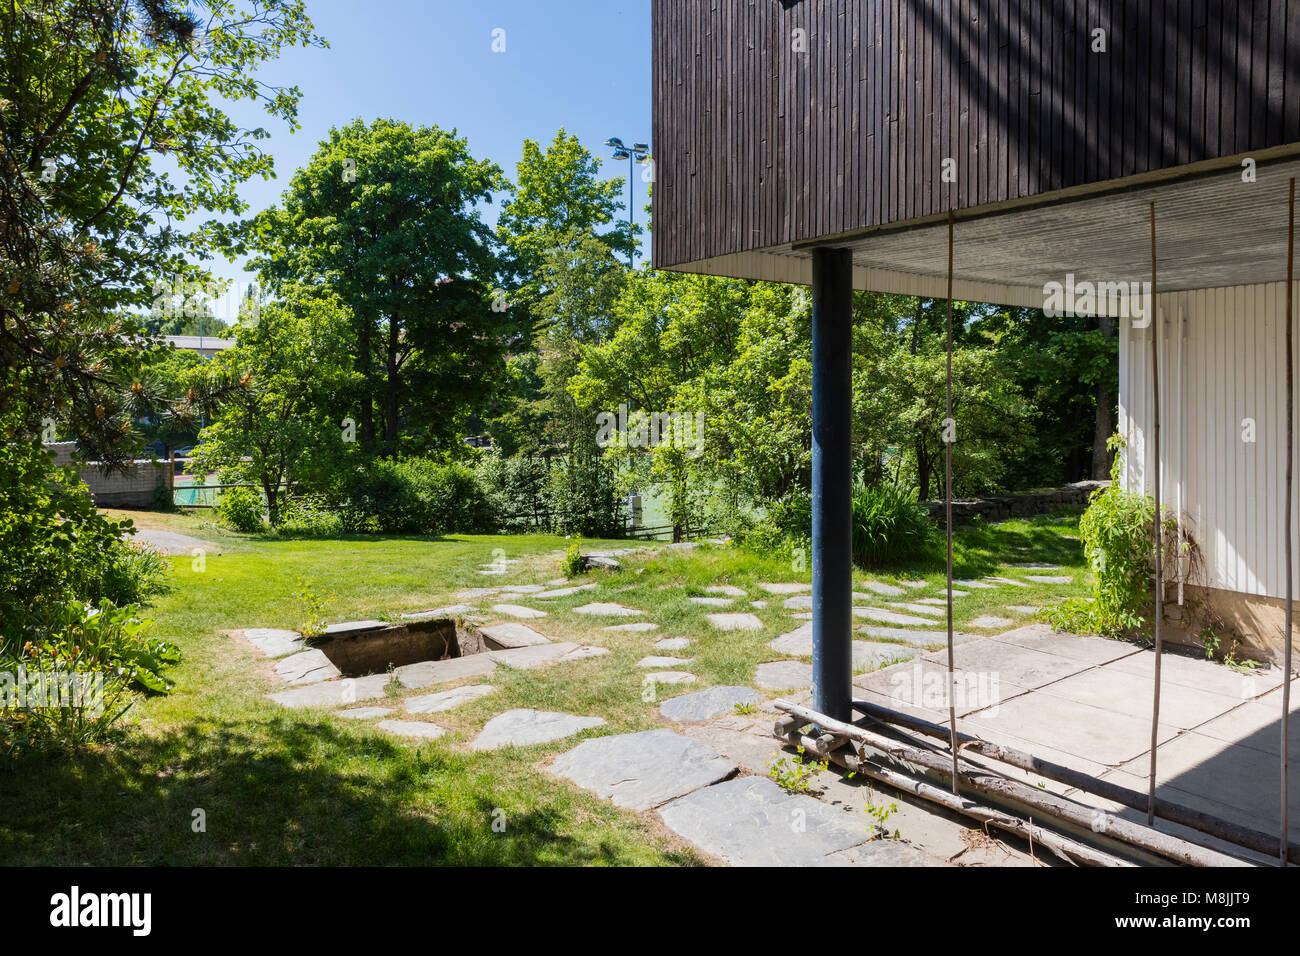 The Aalto House was designed by Finnish architect Alvar Aalto. The house in Munkkiniemi, Helsinki, was completed in 1936 as home and studio for Aalto. Stock Photo